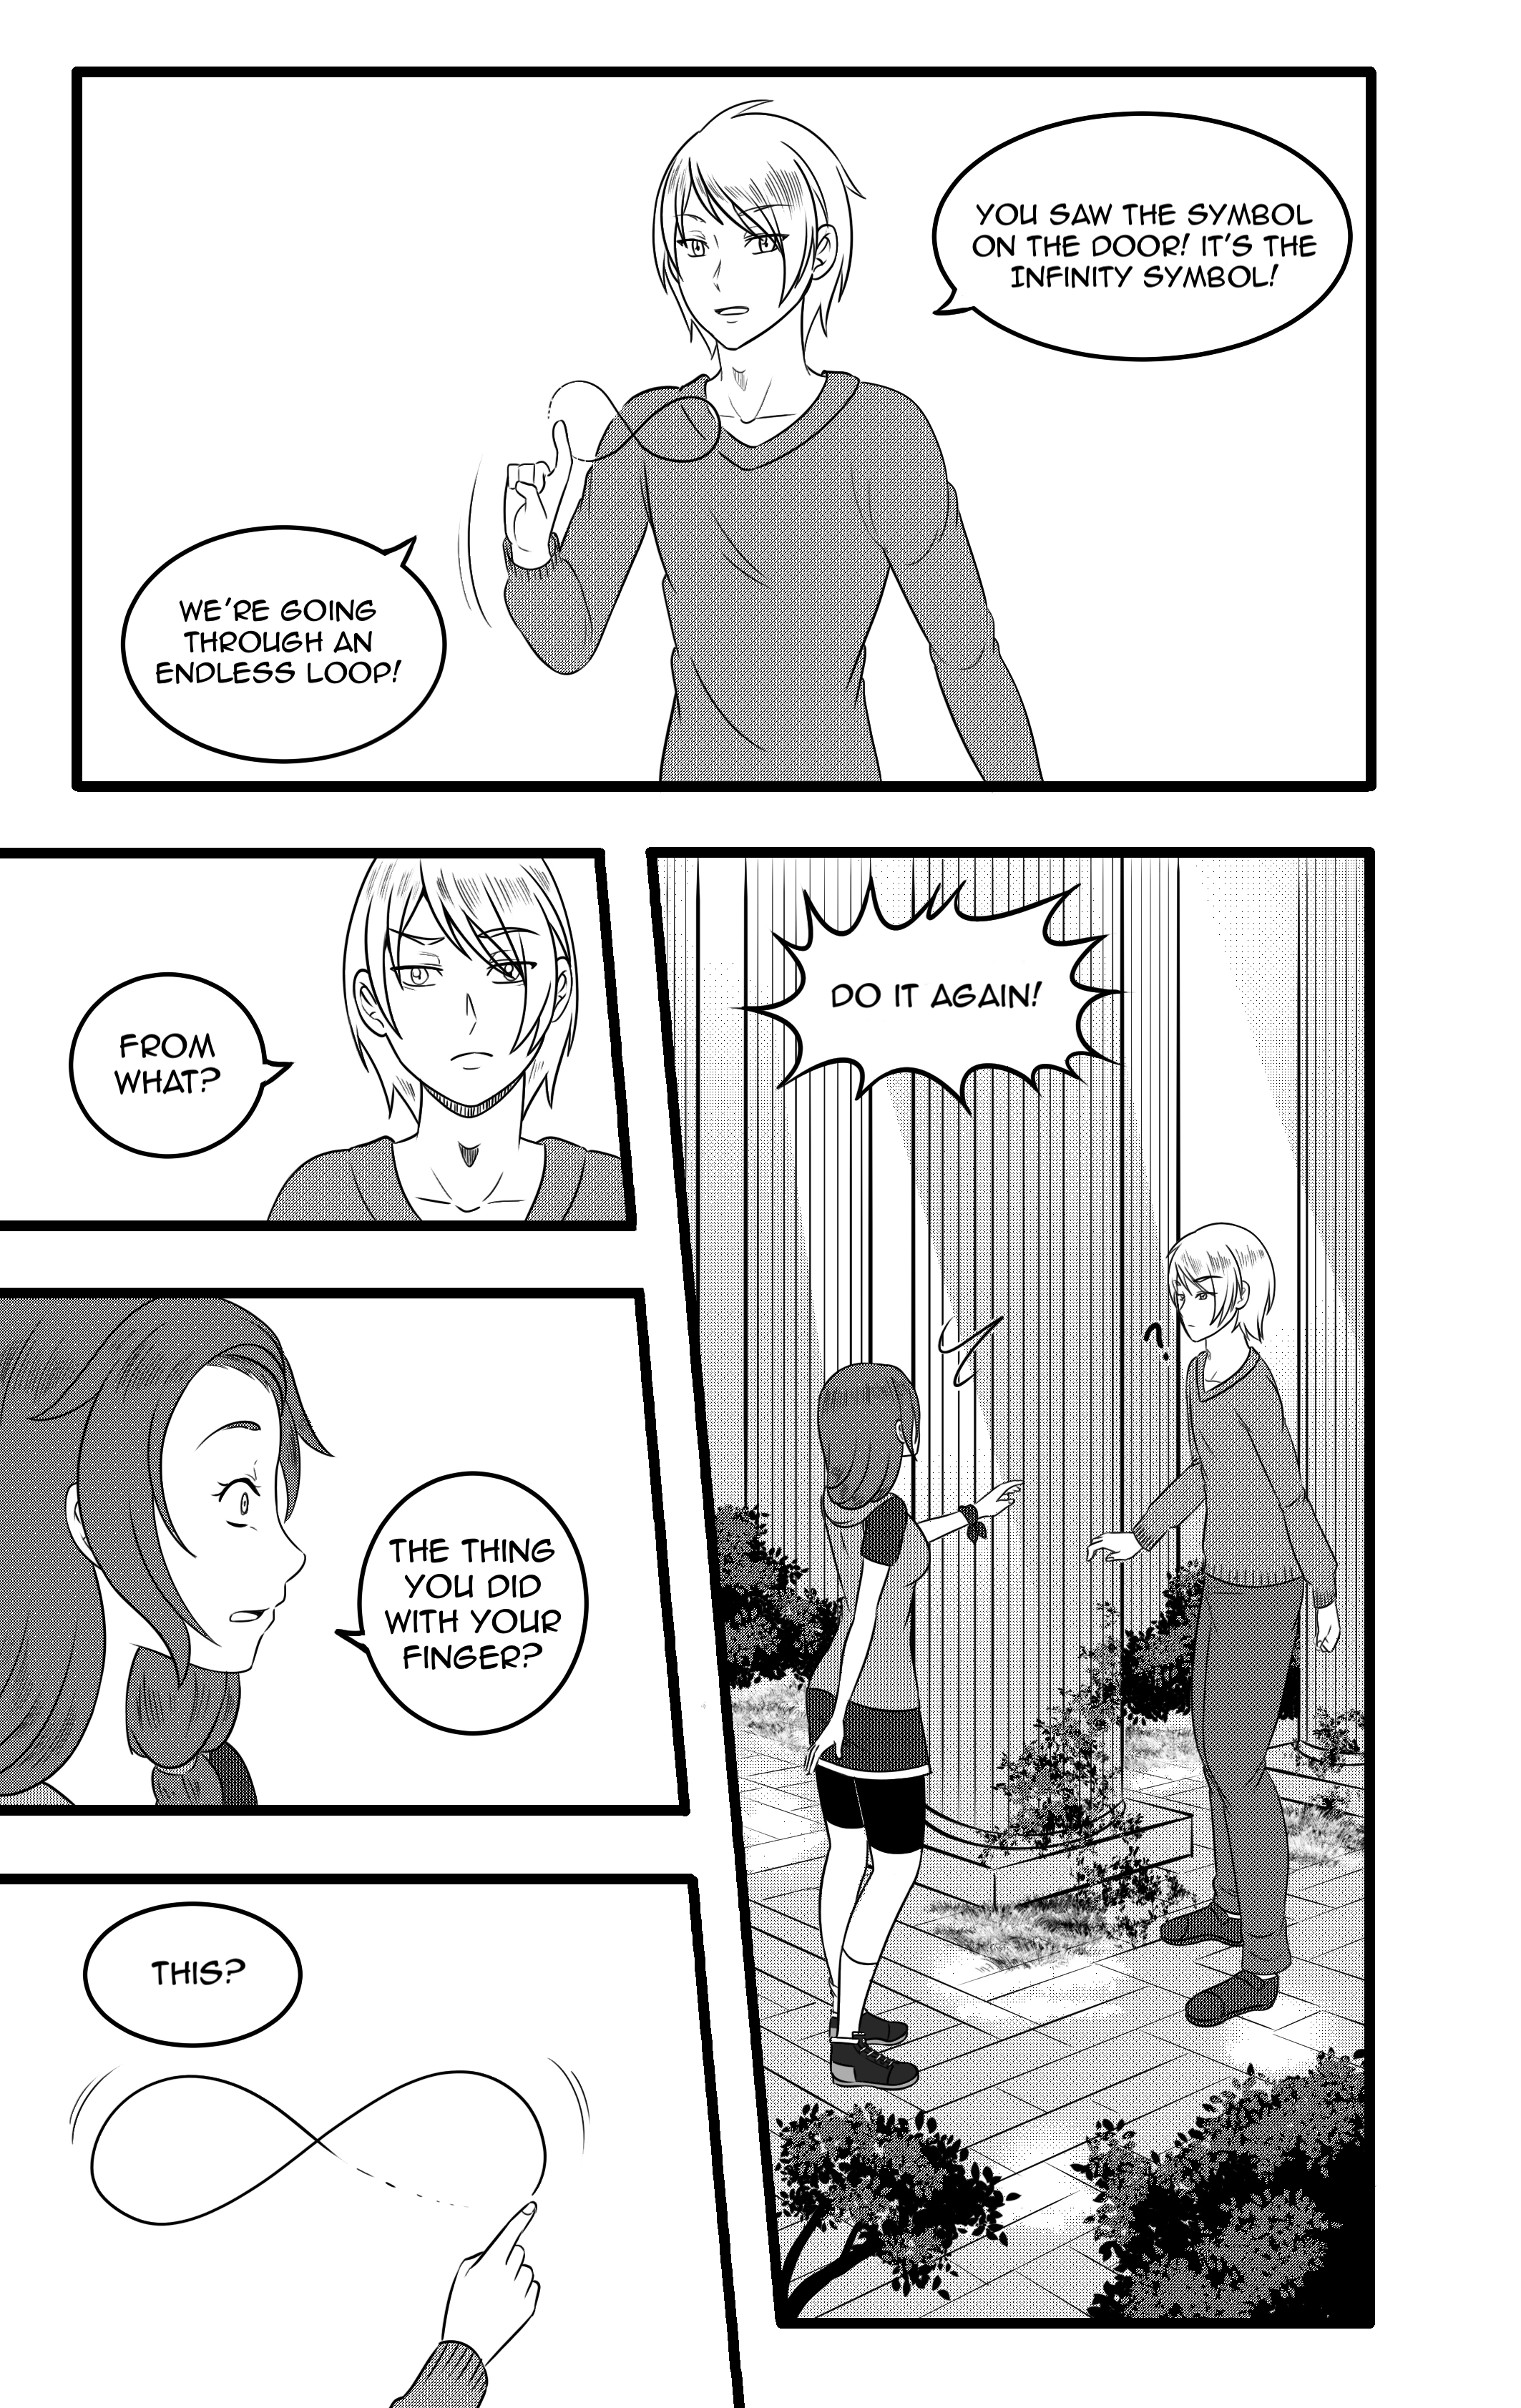 While chapter 5 - page 9